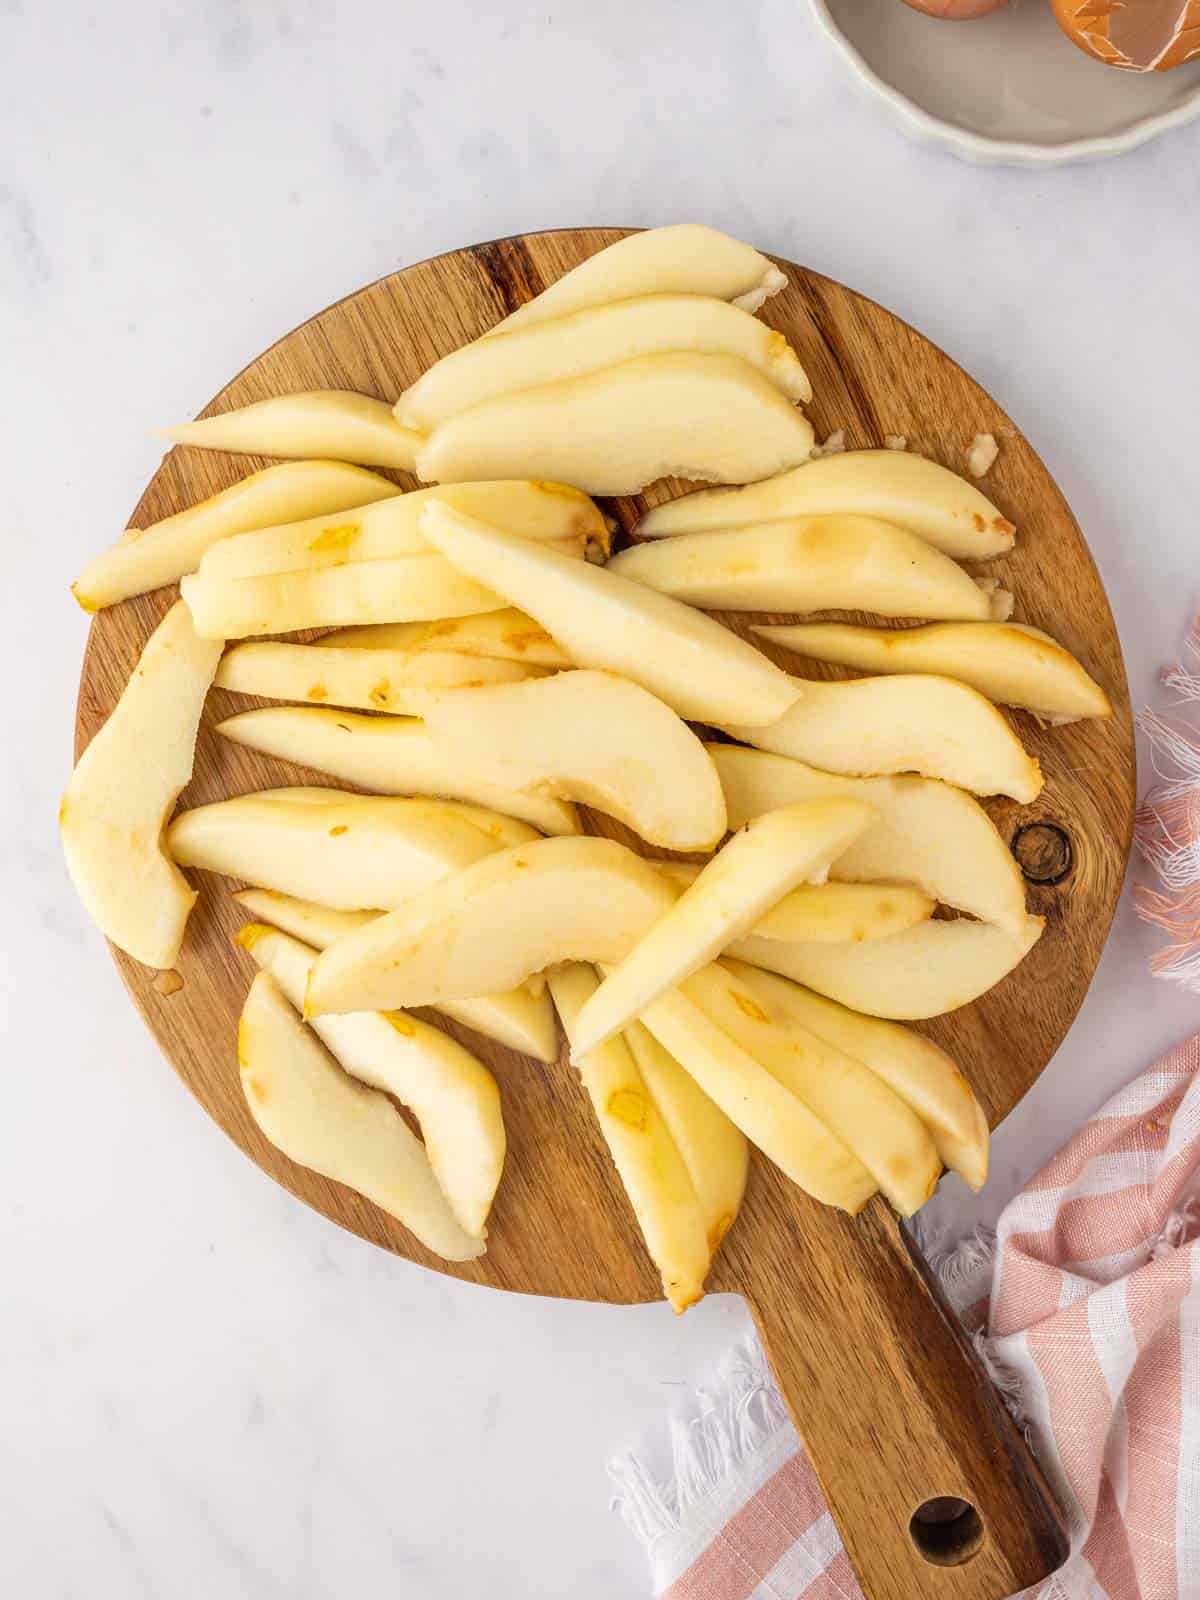 Fresh pears are sliced into even pieces.